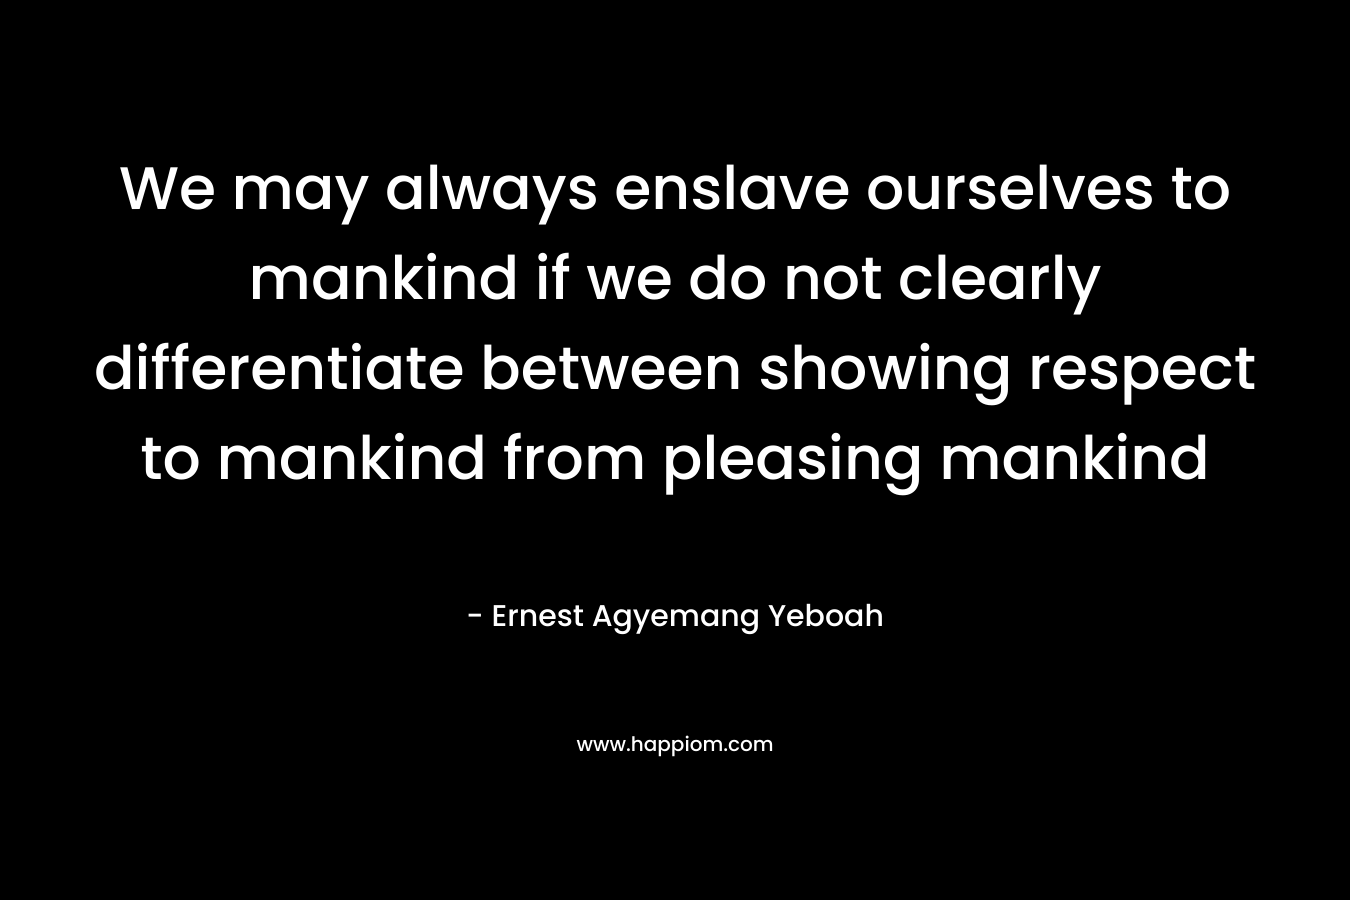 We may always enslave ourselves to mankind if we do not clearly differentiate between showing respect to mankind from pleasing mankind